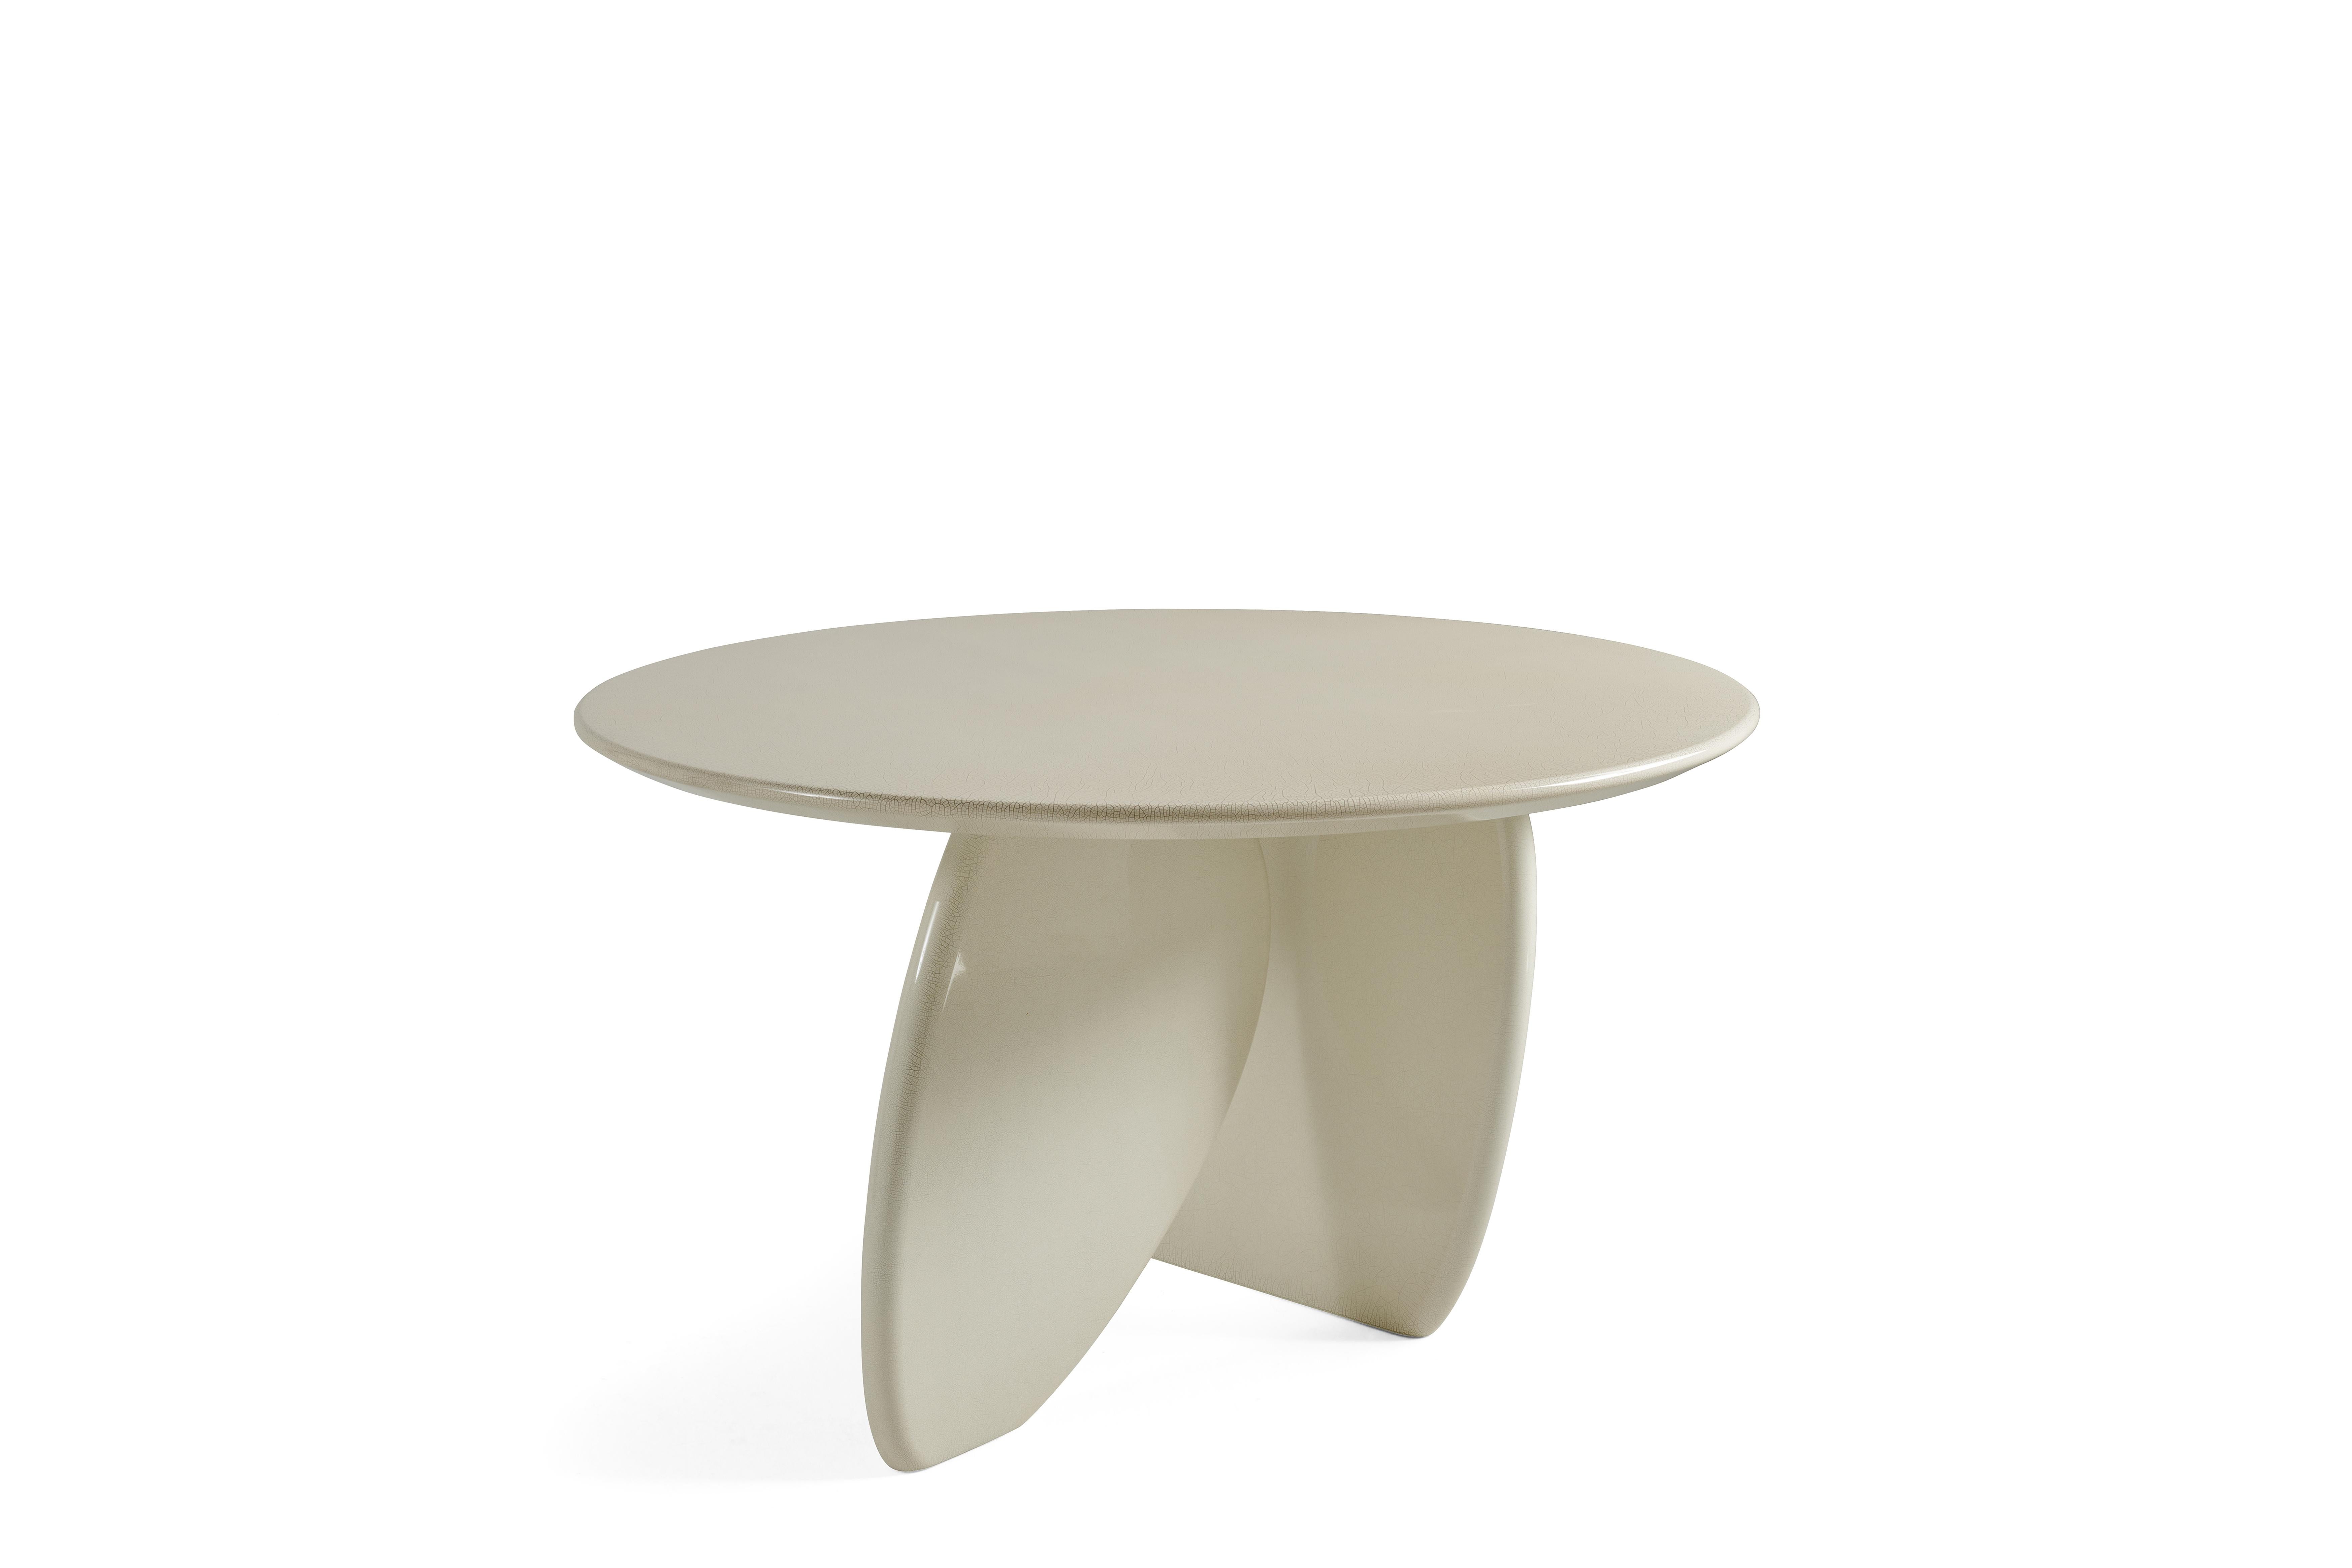 Organic shapes and essential design for the Aldabra entrance table. It is the perfect complement to the entrance area, adding charm and functionality to modern or contemporary interiors.
Entrance table with top and structure in MDF with Egg Shell